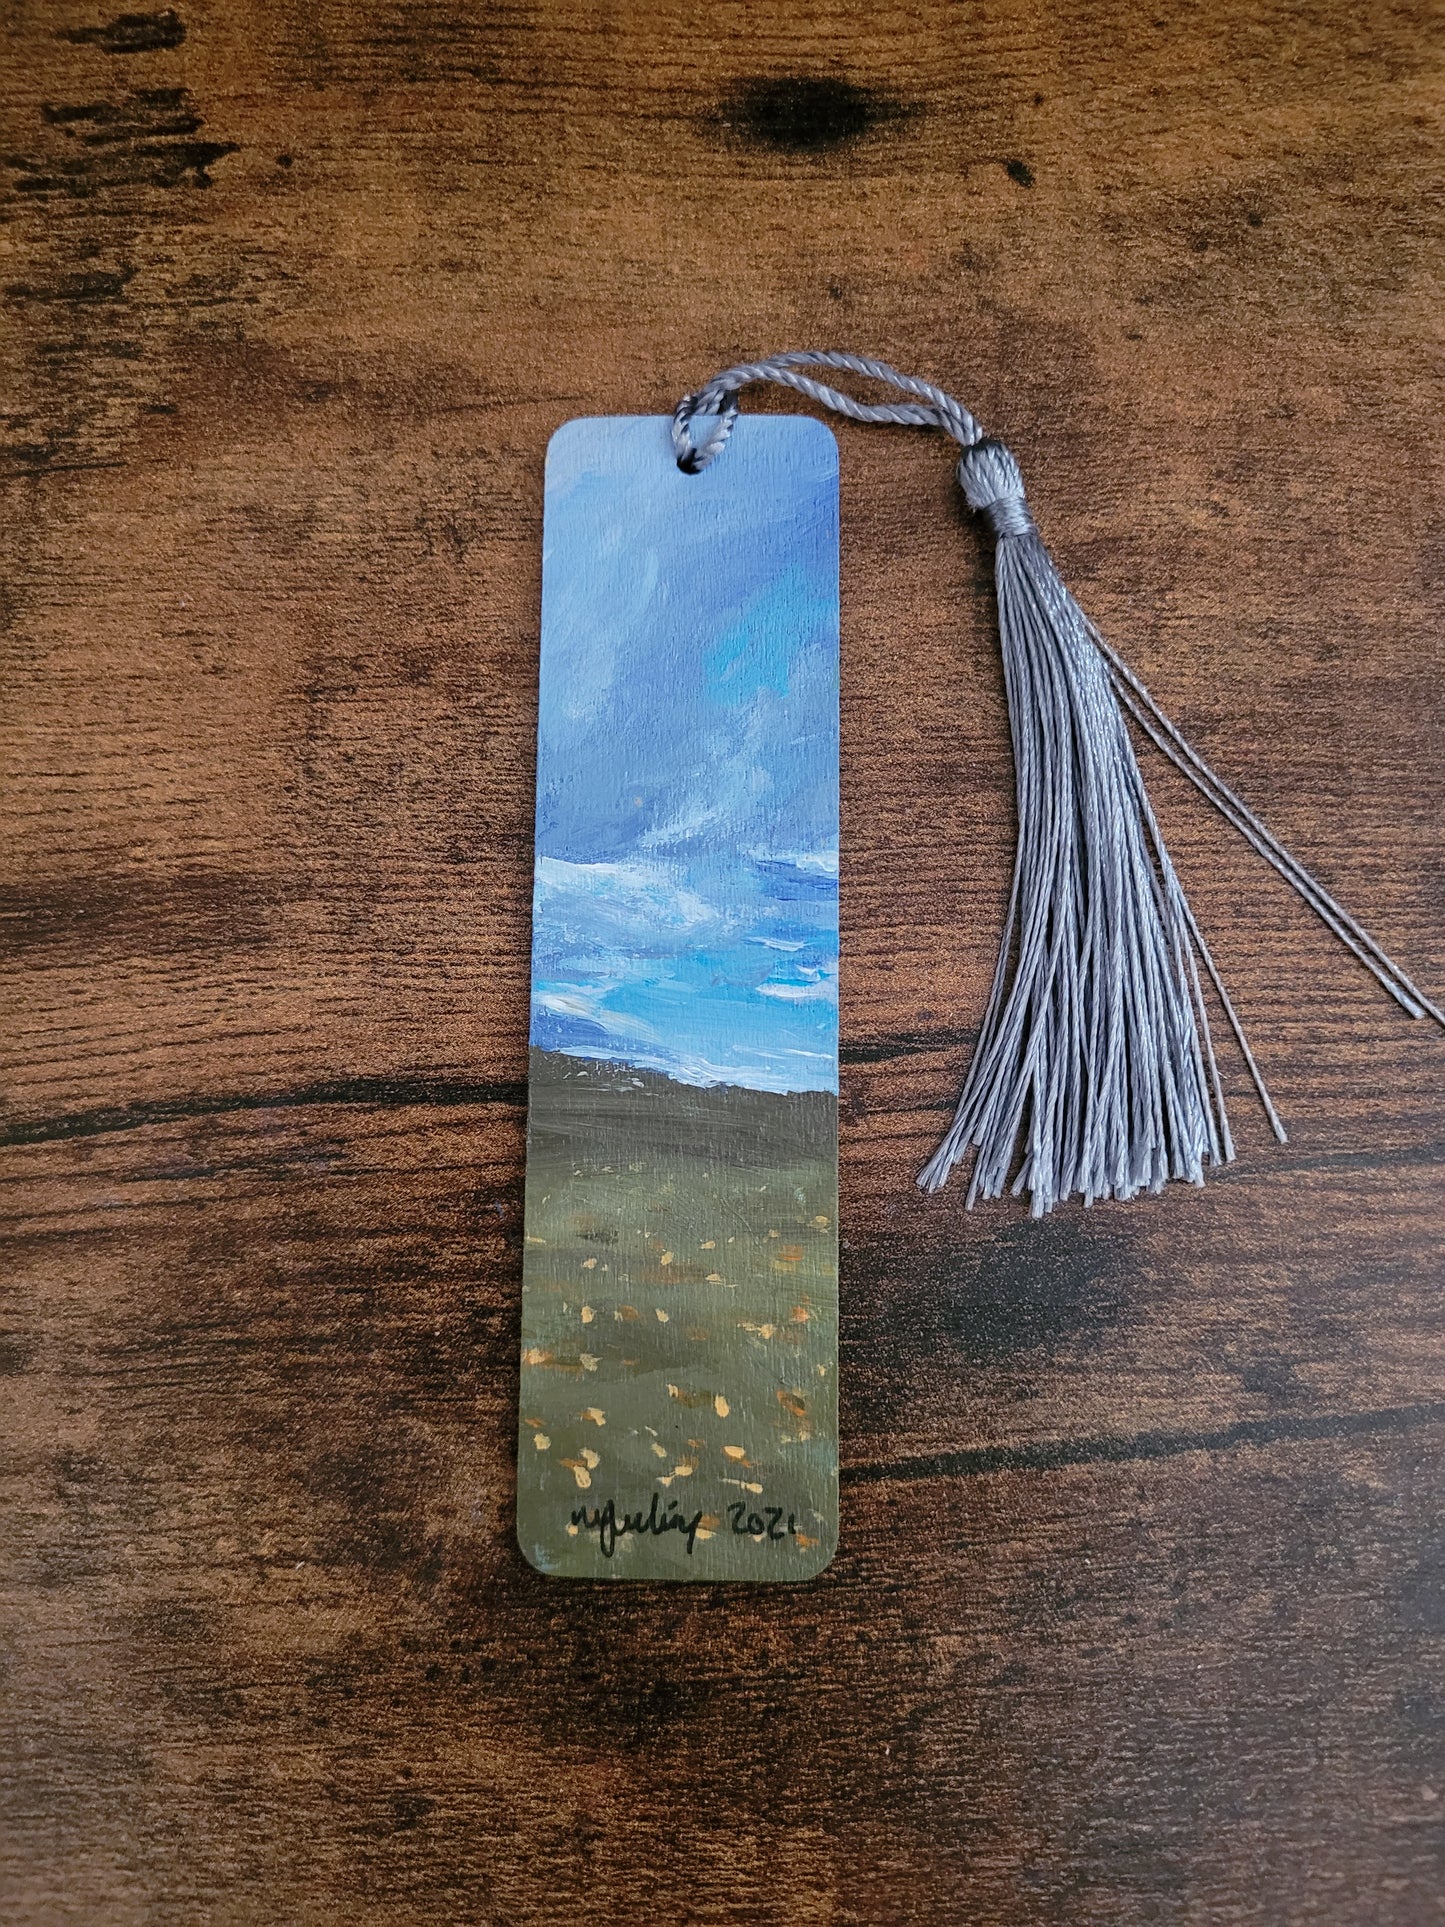 Painted Bookmarks